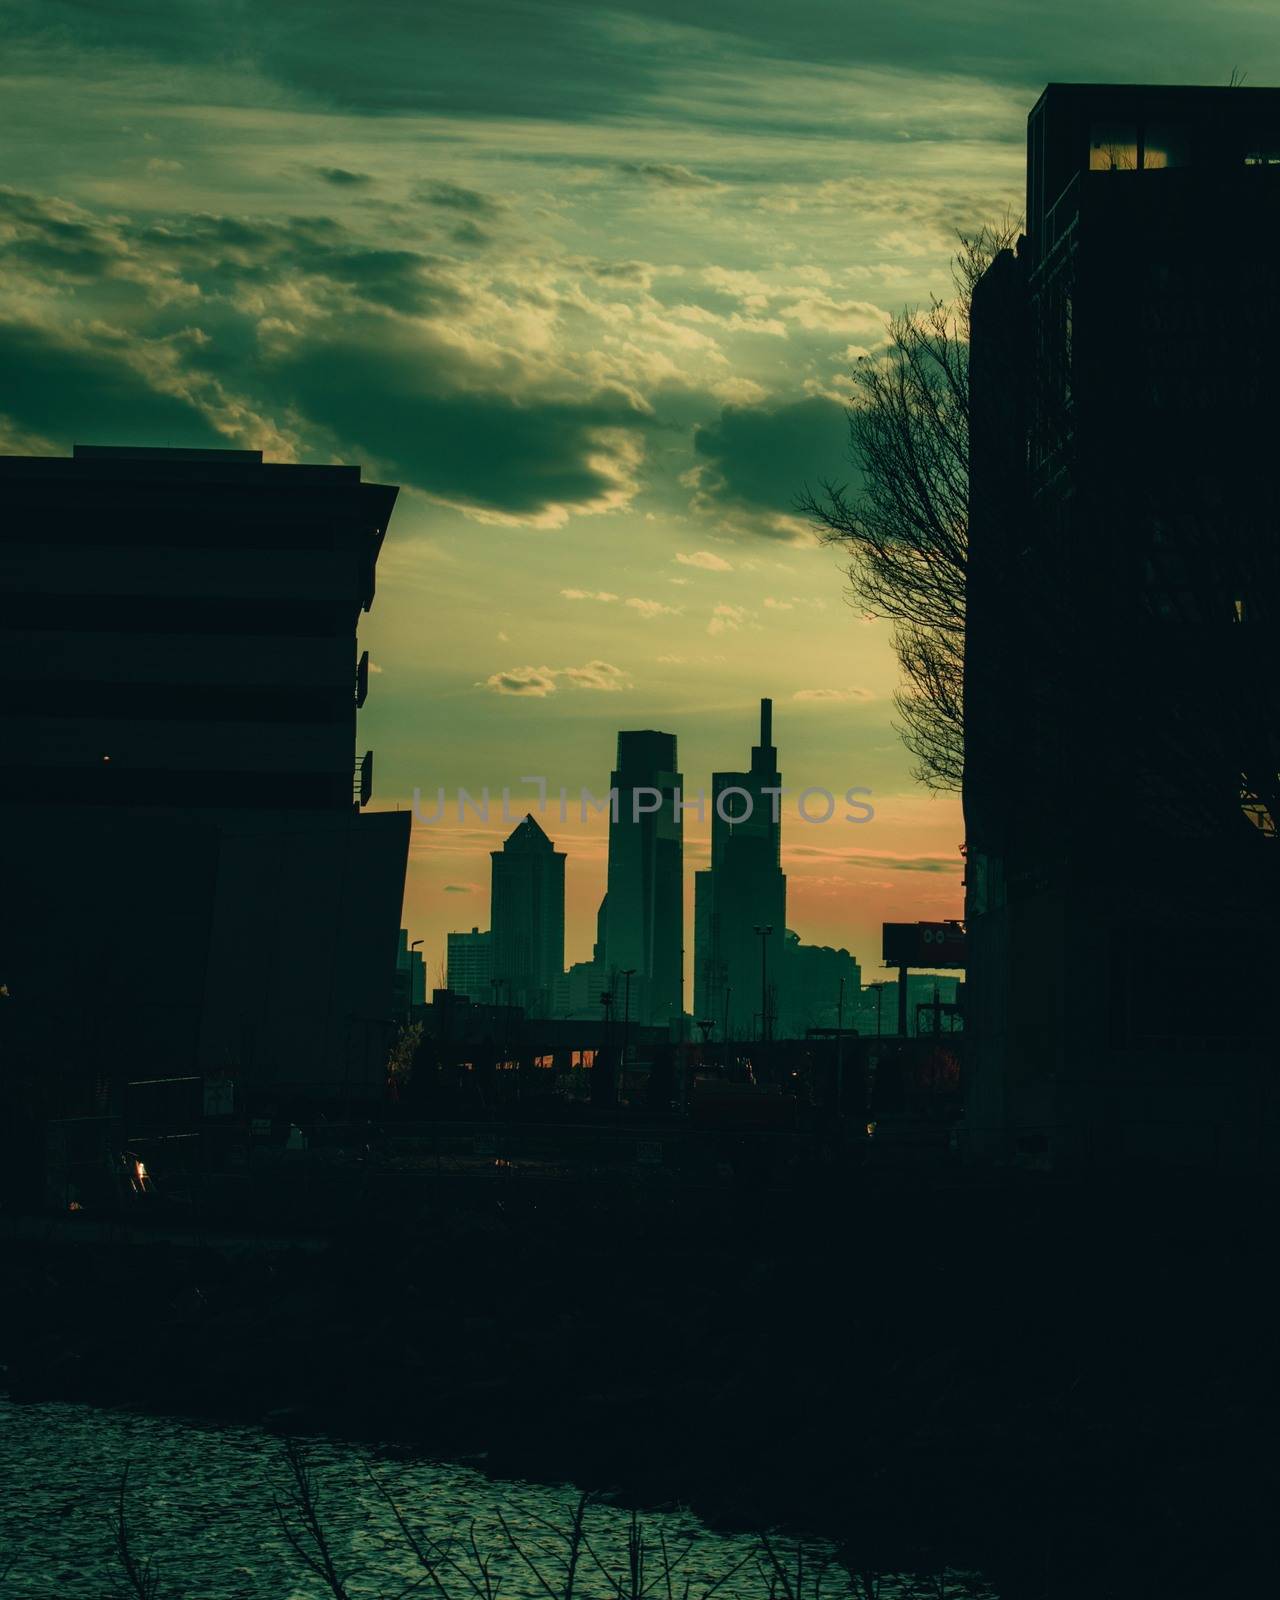 A Silhouette of the Philadelphia Skyline Between Two Buildings by bju12290